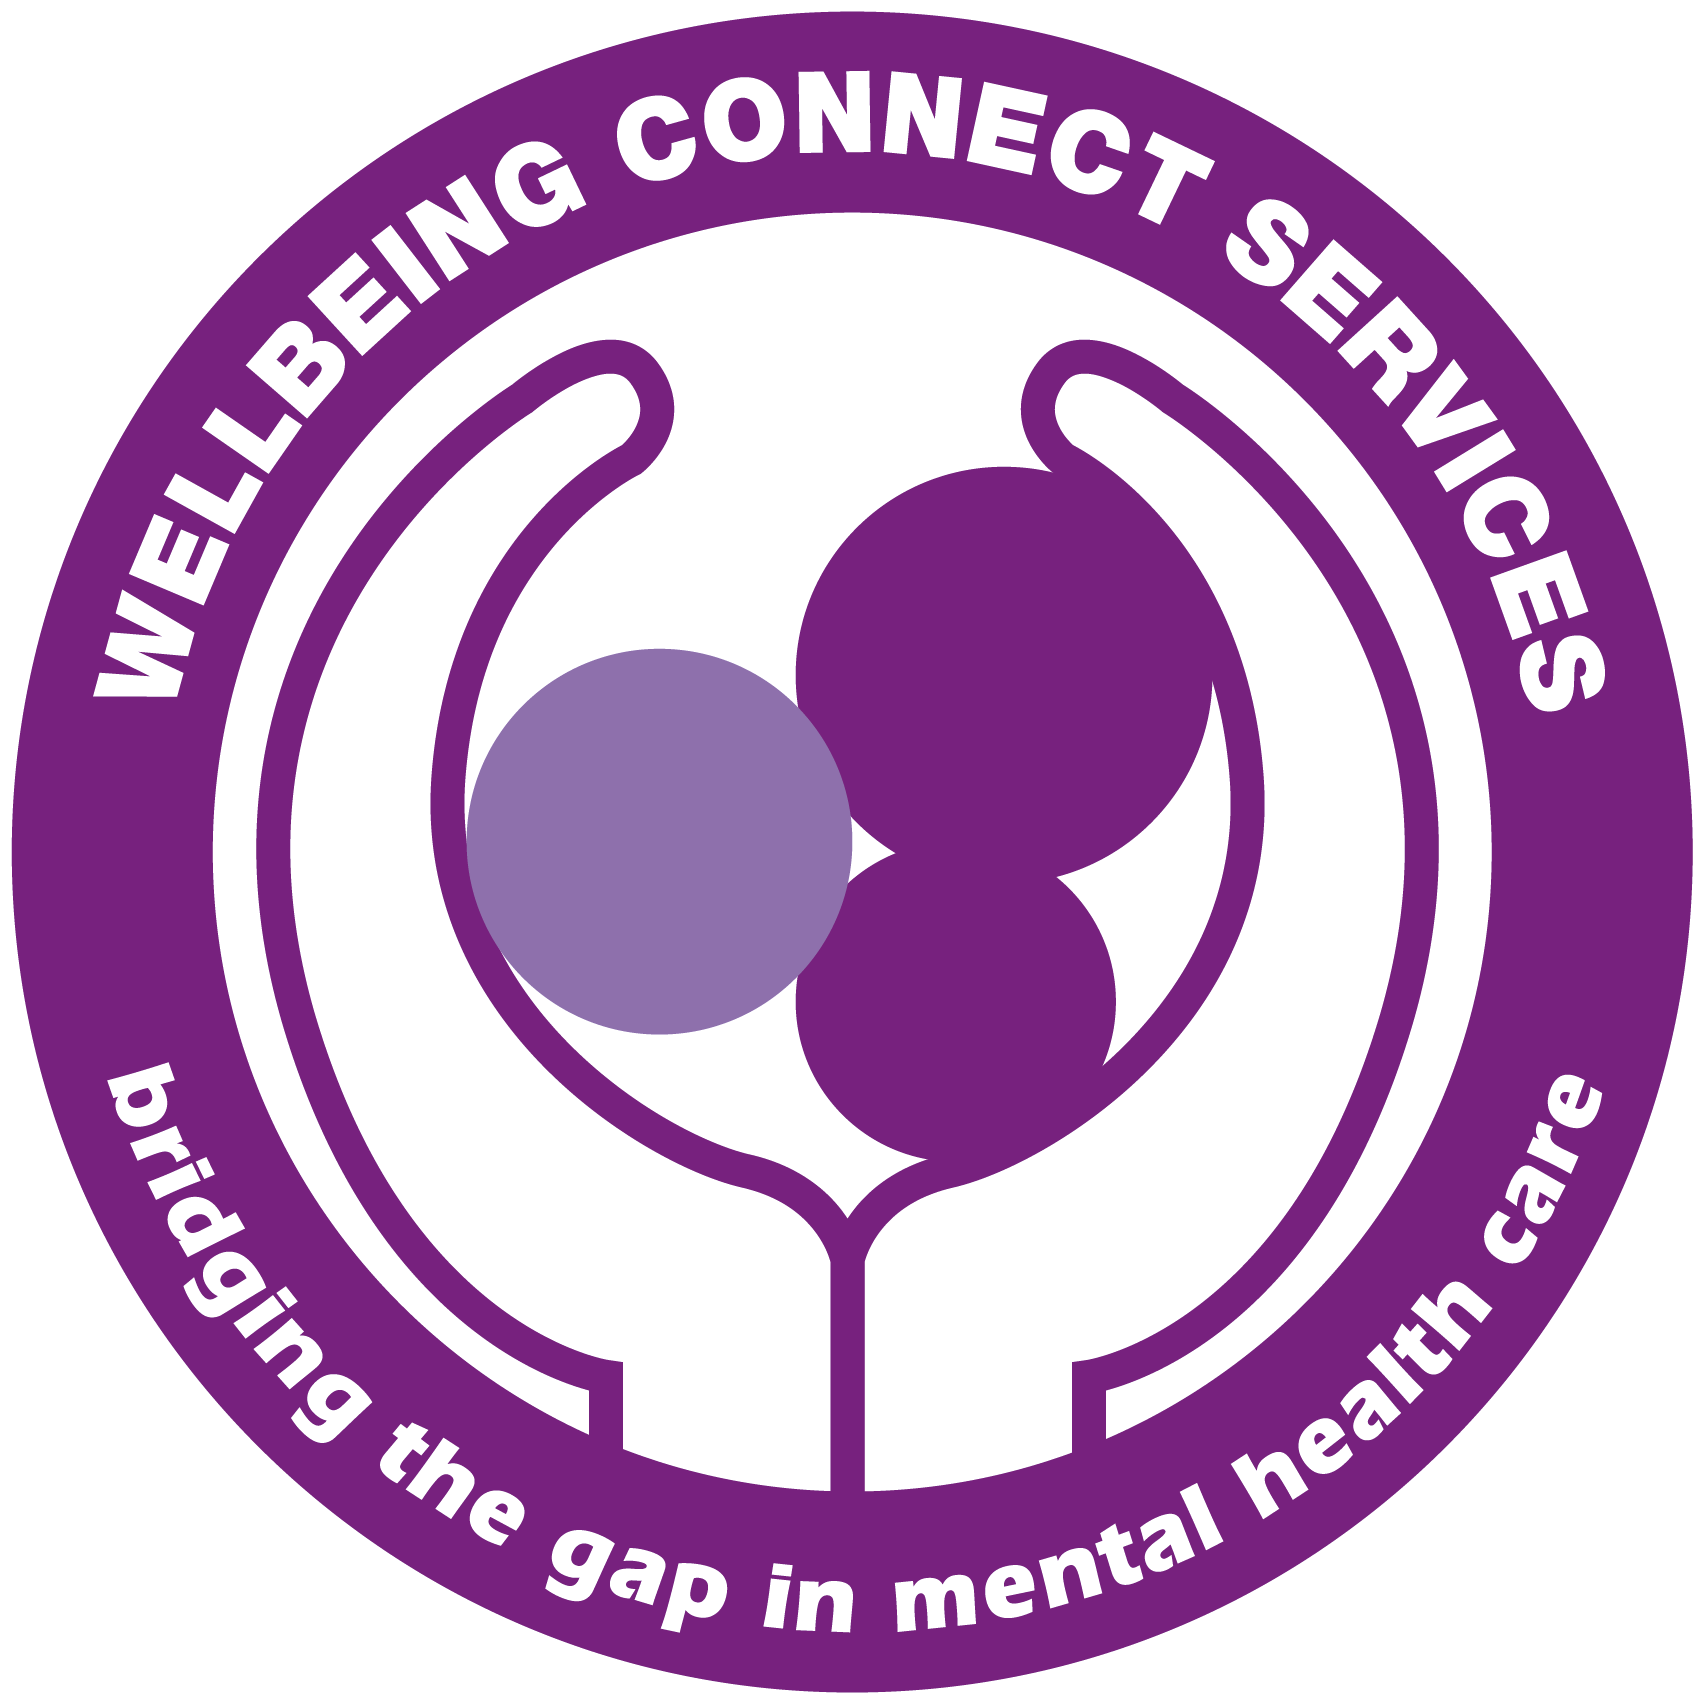 Wellbeing Connect Services